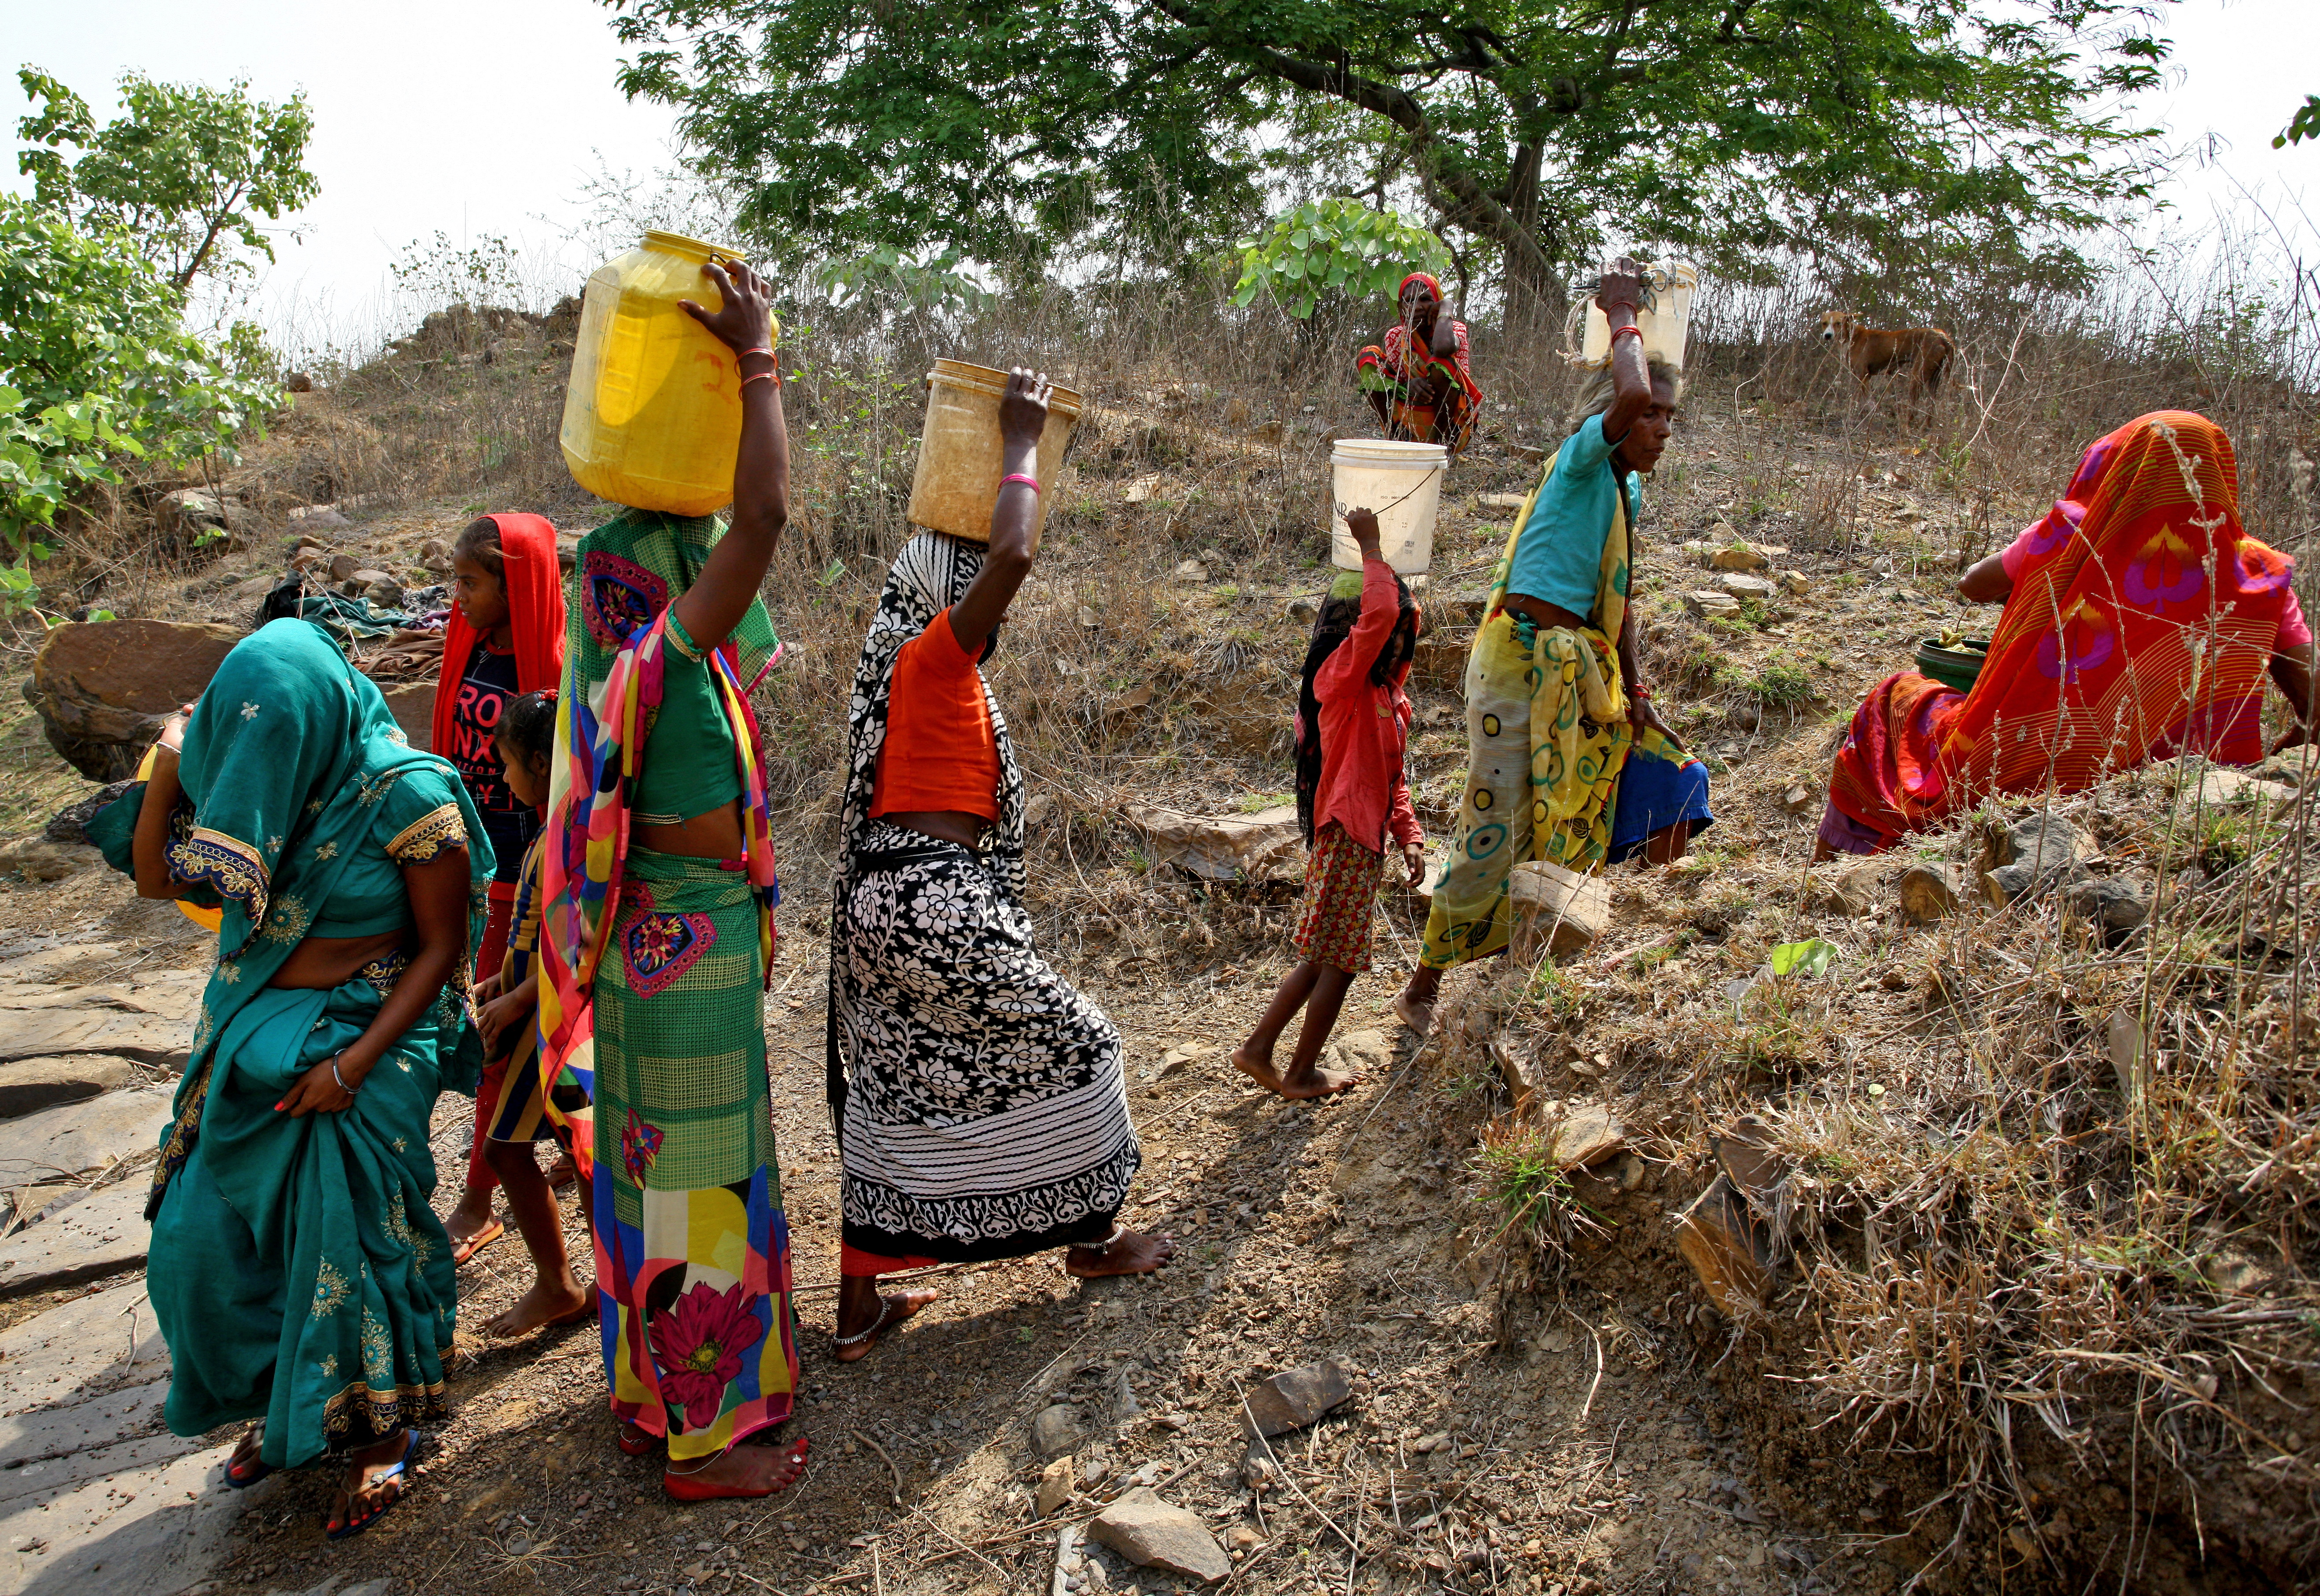 Women carry containers after filling them with water at an abandoned stone quarry on a hot day in Badama village